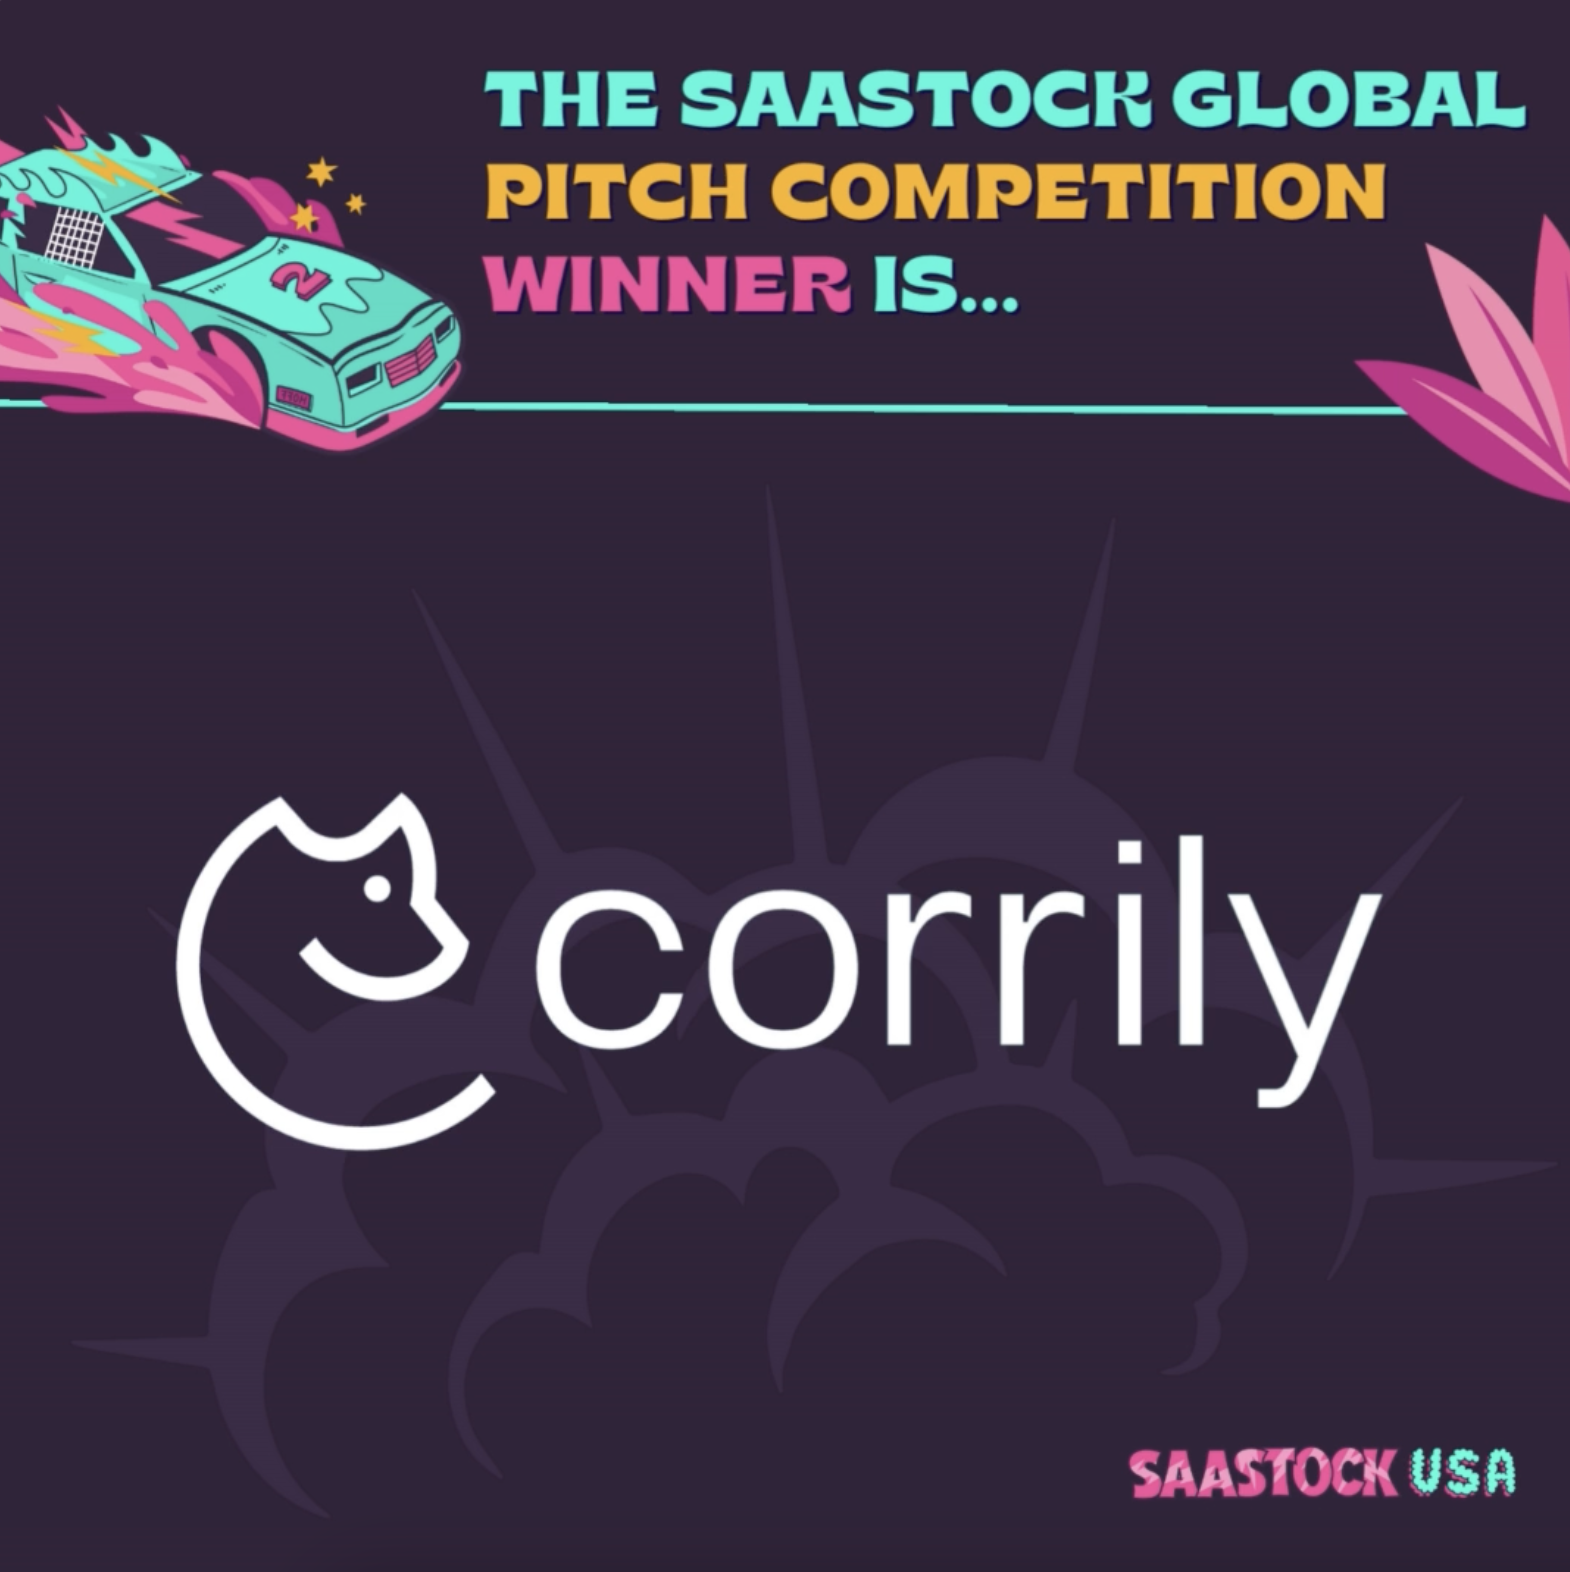 corrily-wins-first-place-in-inaugural-saastock-usa-global-pitch-competition